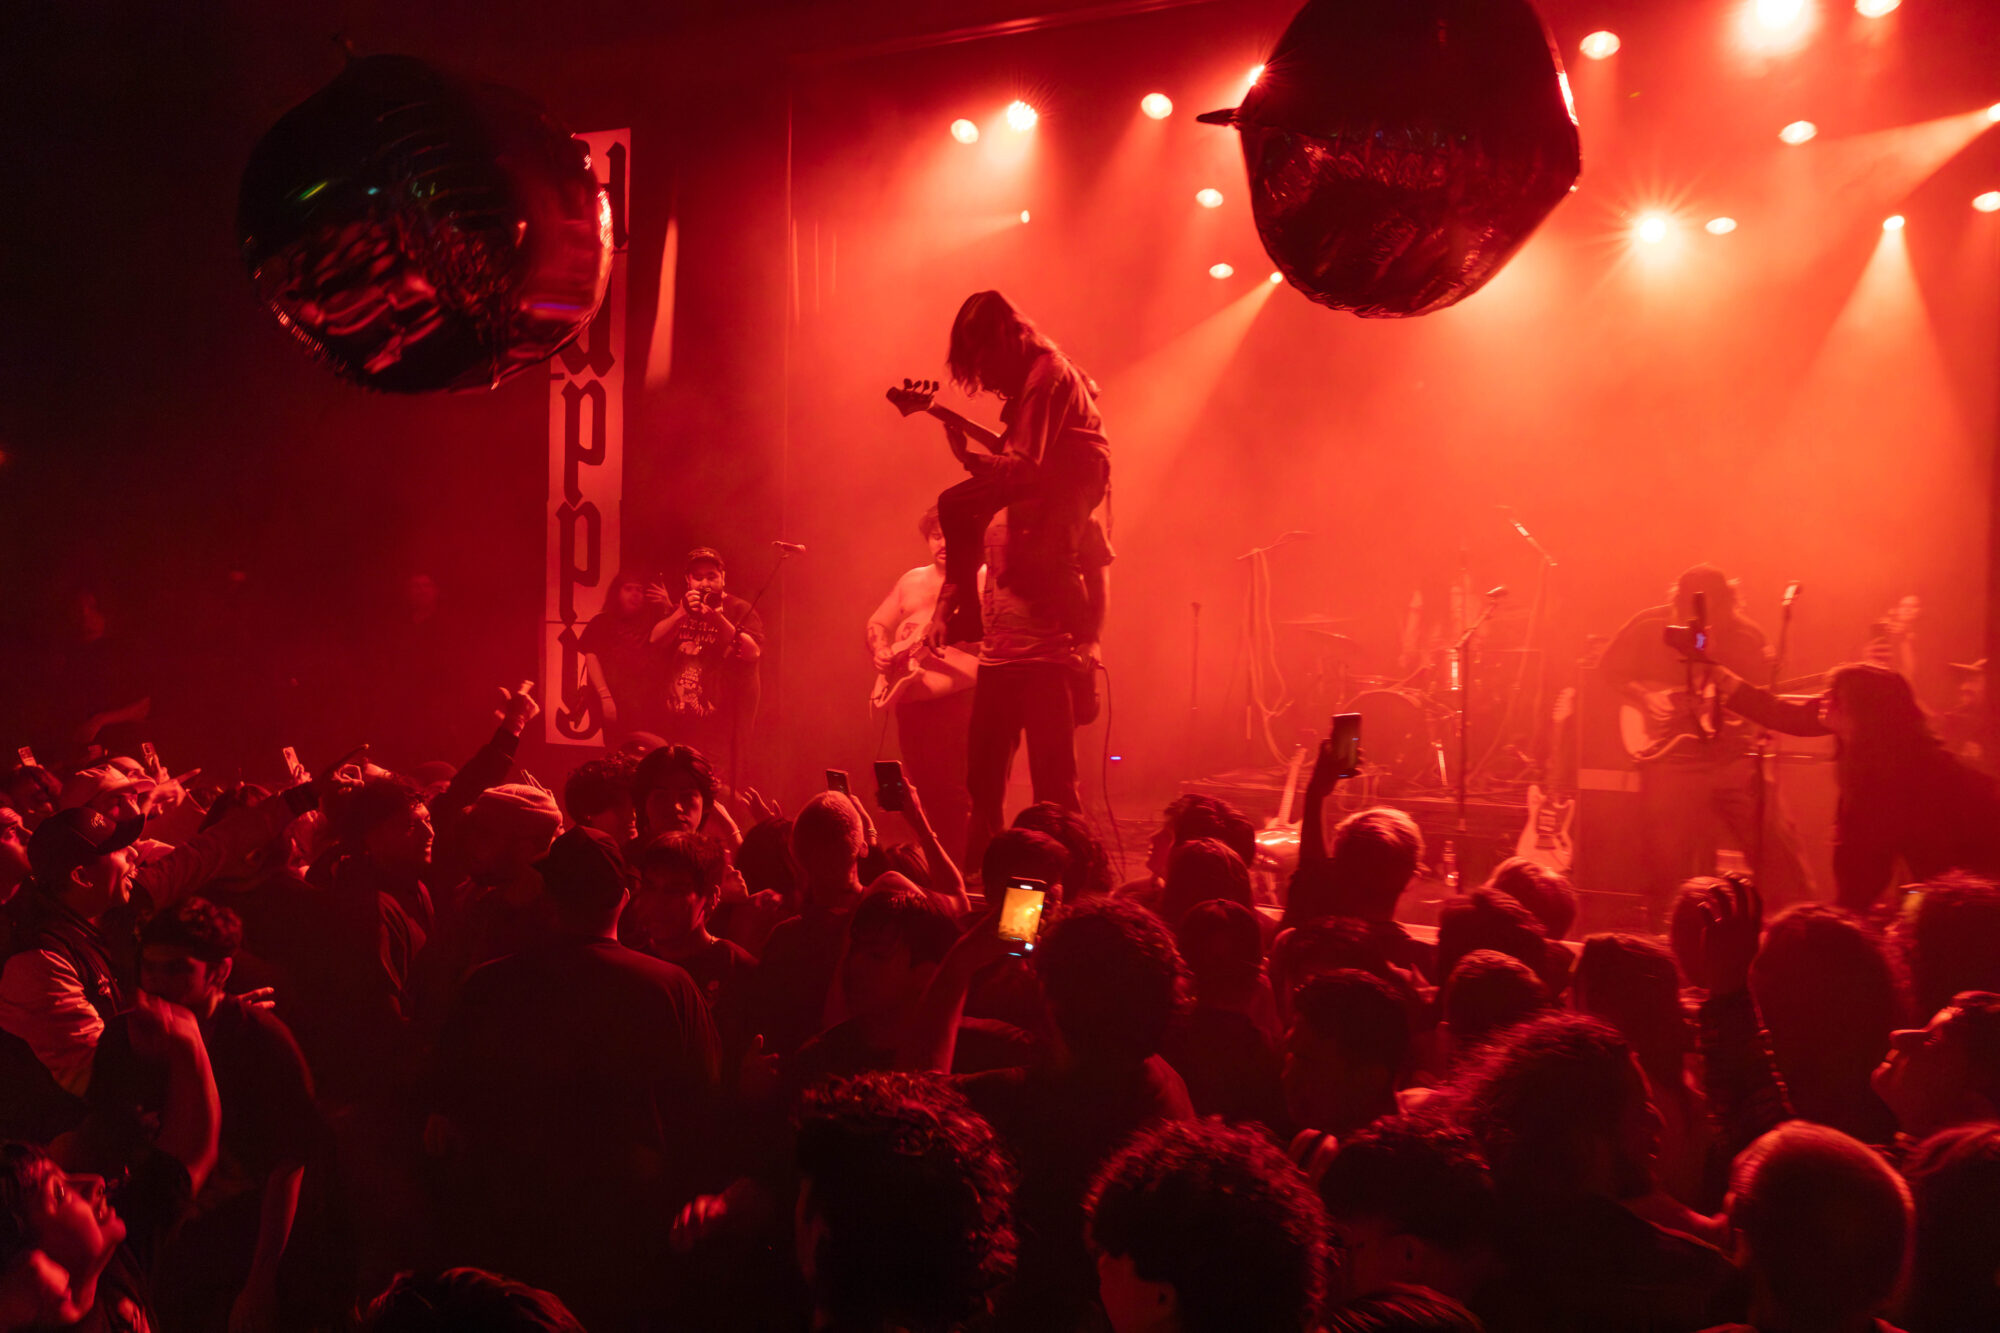 A band performing under red light